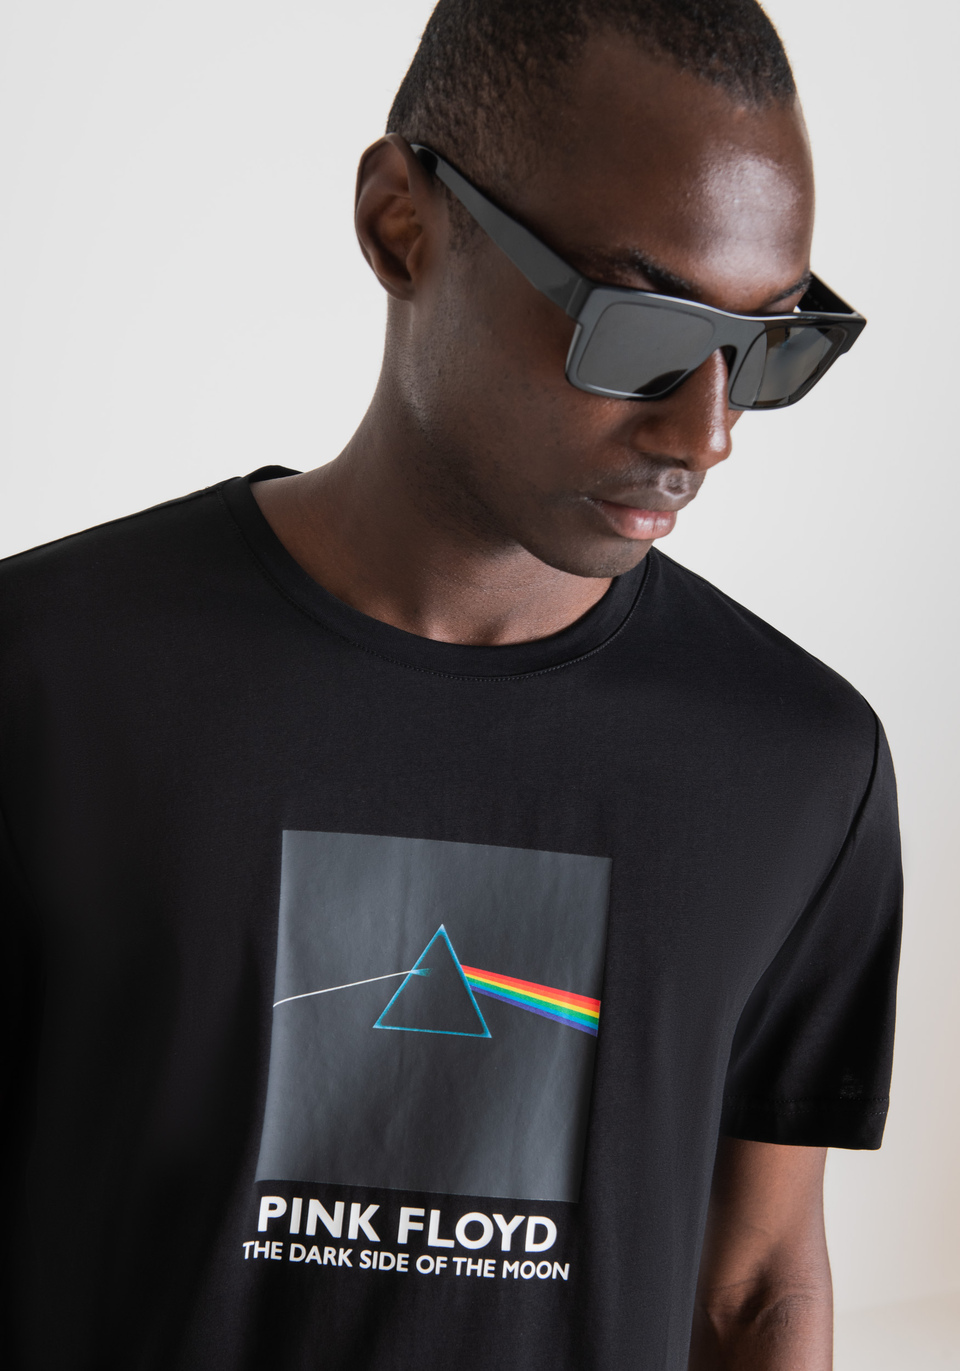 SLIM FIT T-SHIRT IN PURE COTTON WITH RUBBERISED PINK FLOYD PRINT - Antony Morato Online Shop